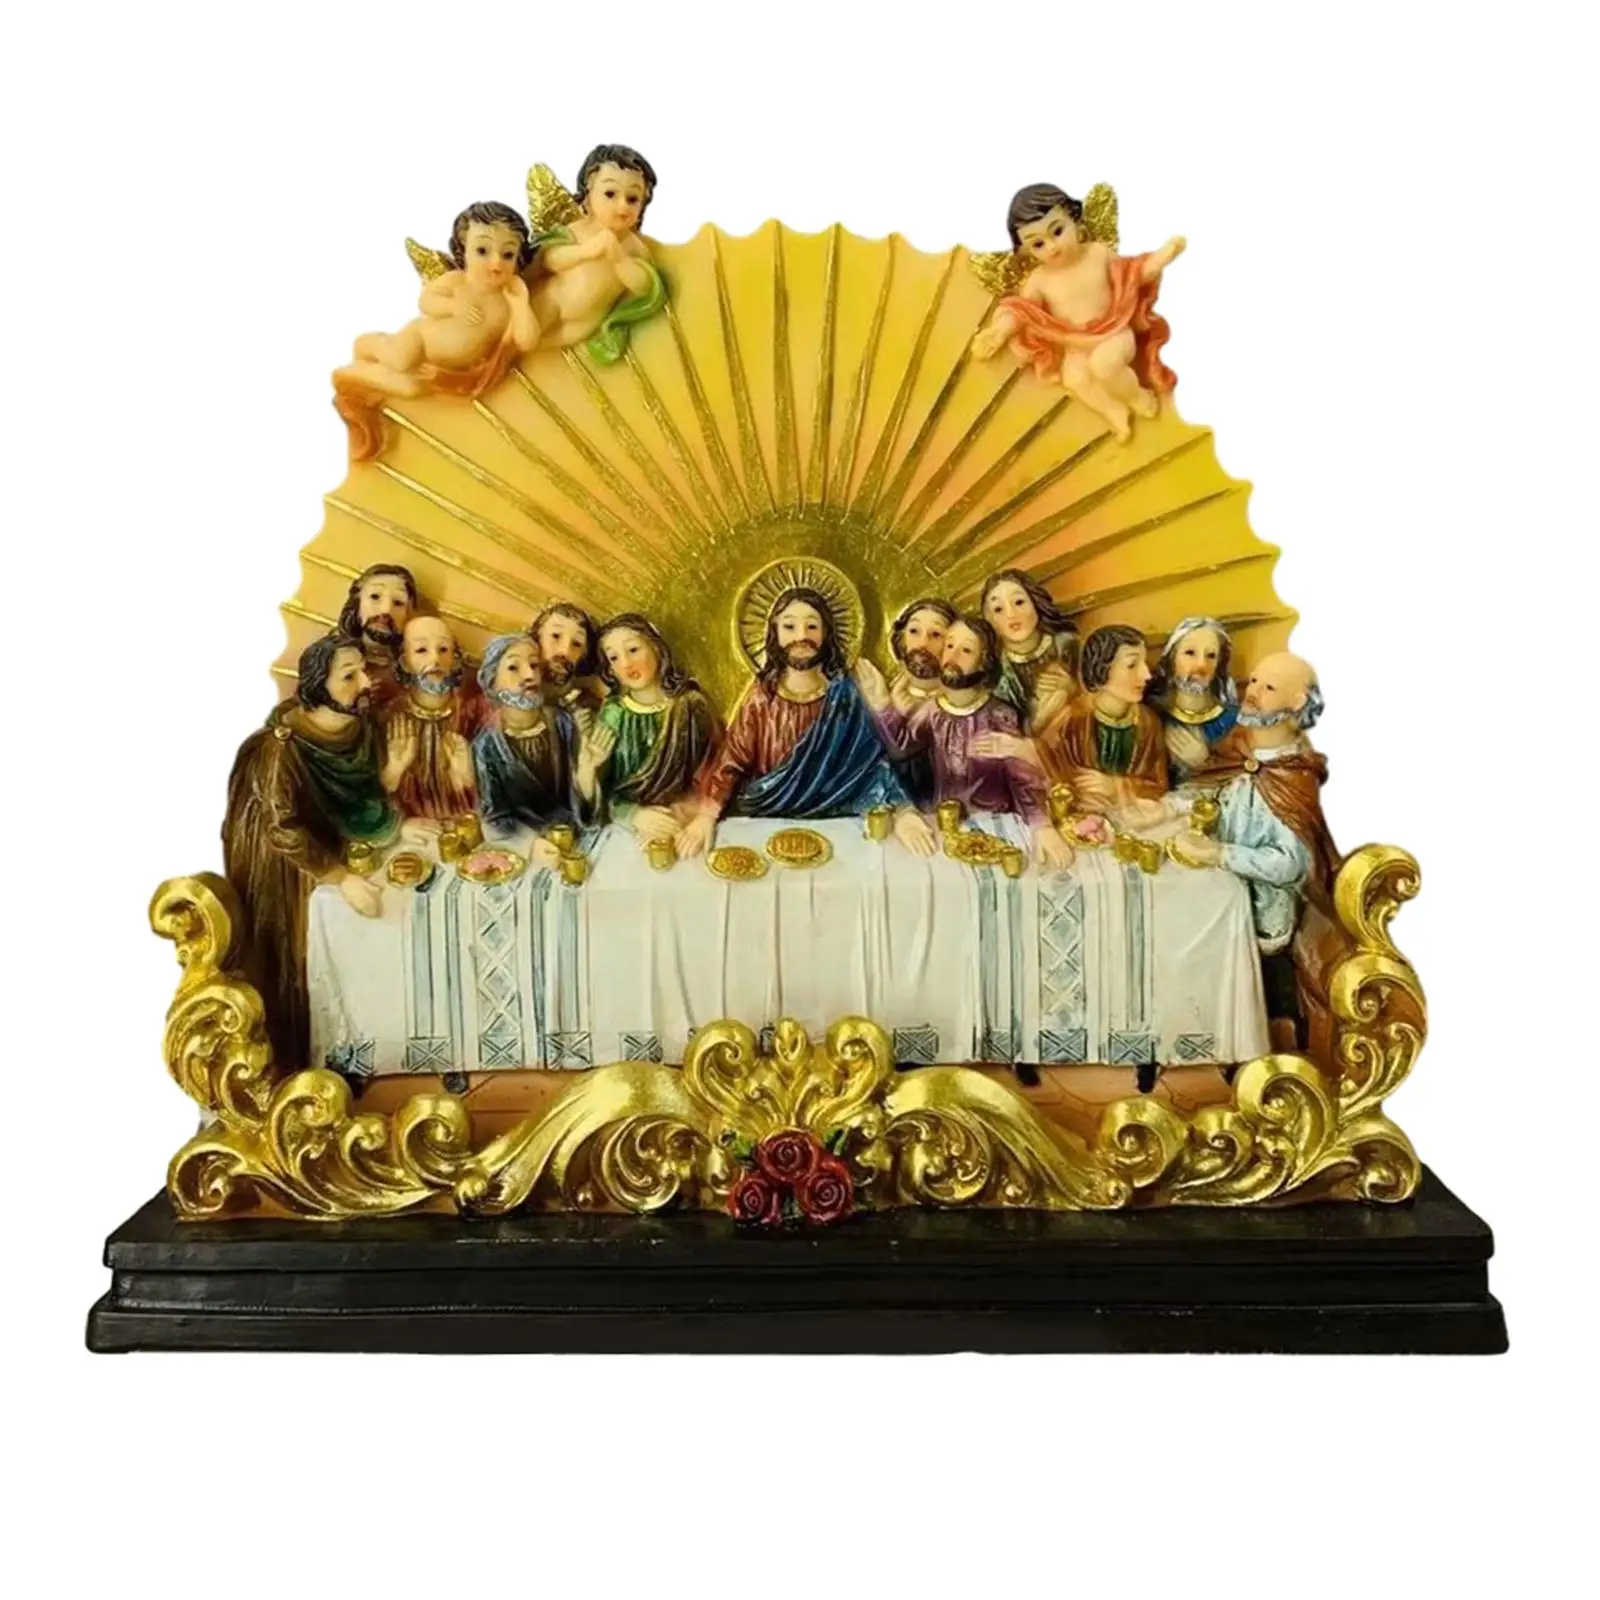 Resin Last Supper Statue Sculpture Christian Catholic Figurine Jesus and 12 Disciples for Office Collection Gifts Decor